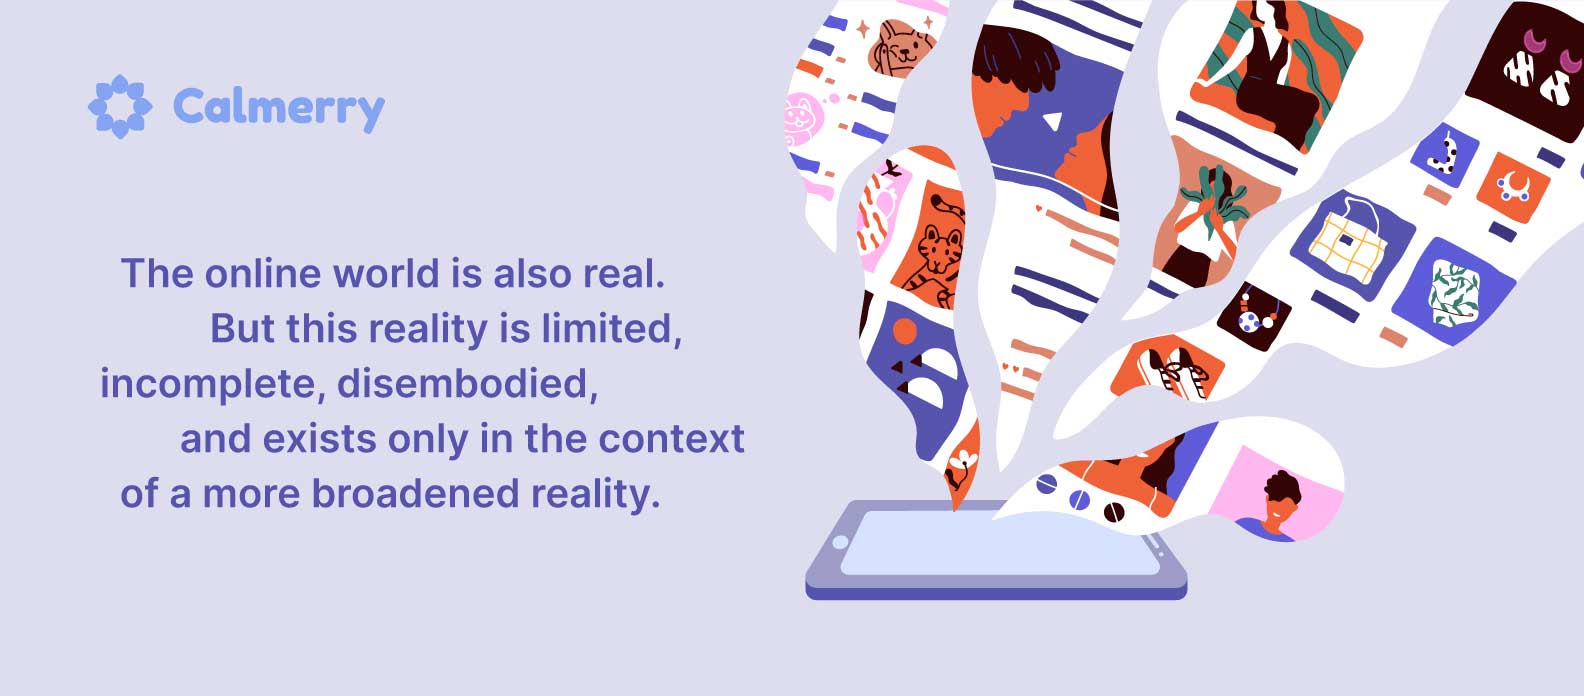 The online world is also real, but exists only in the context of a more broadened reality